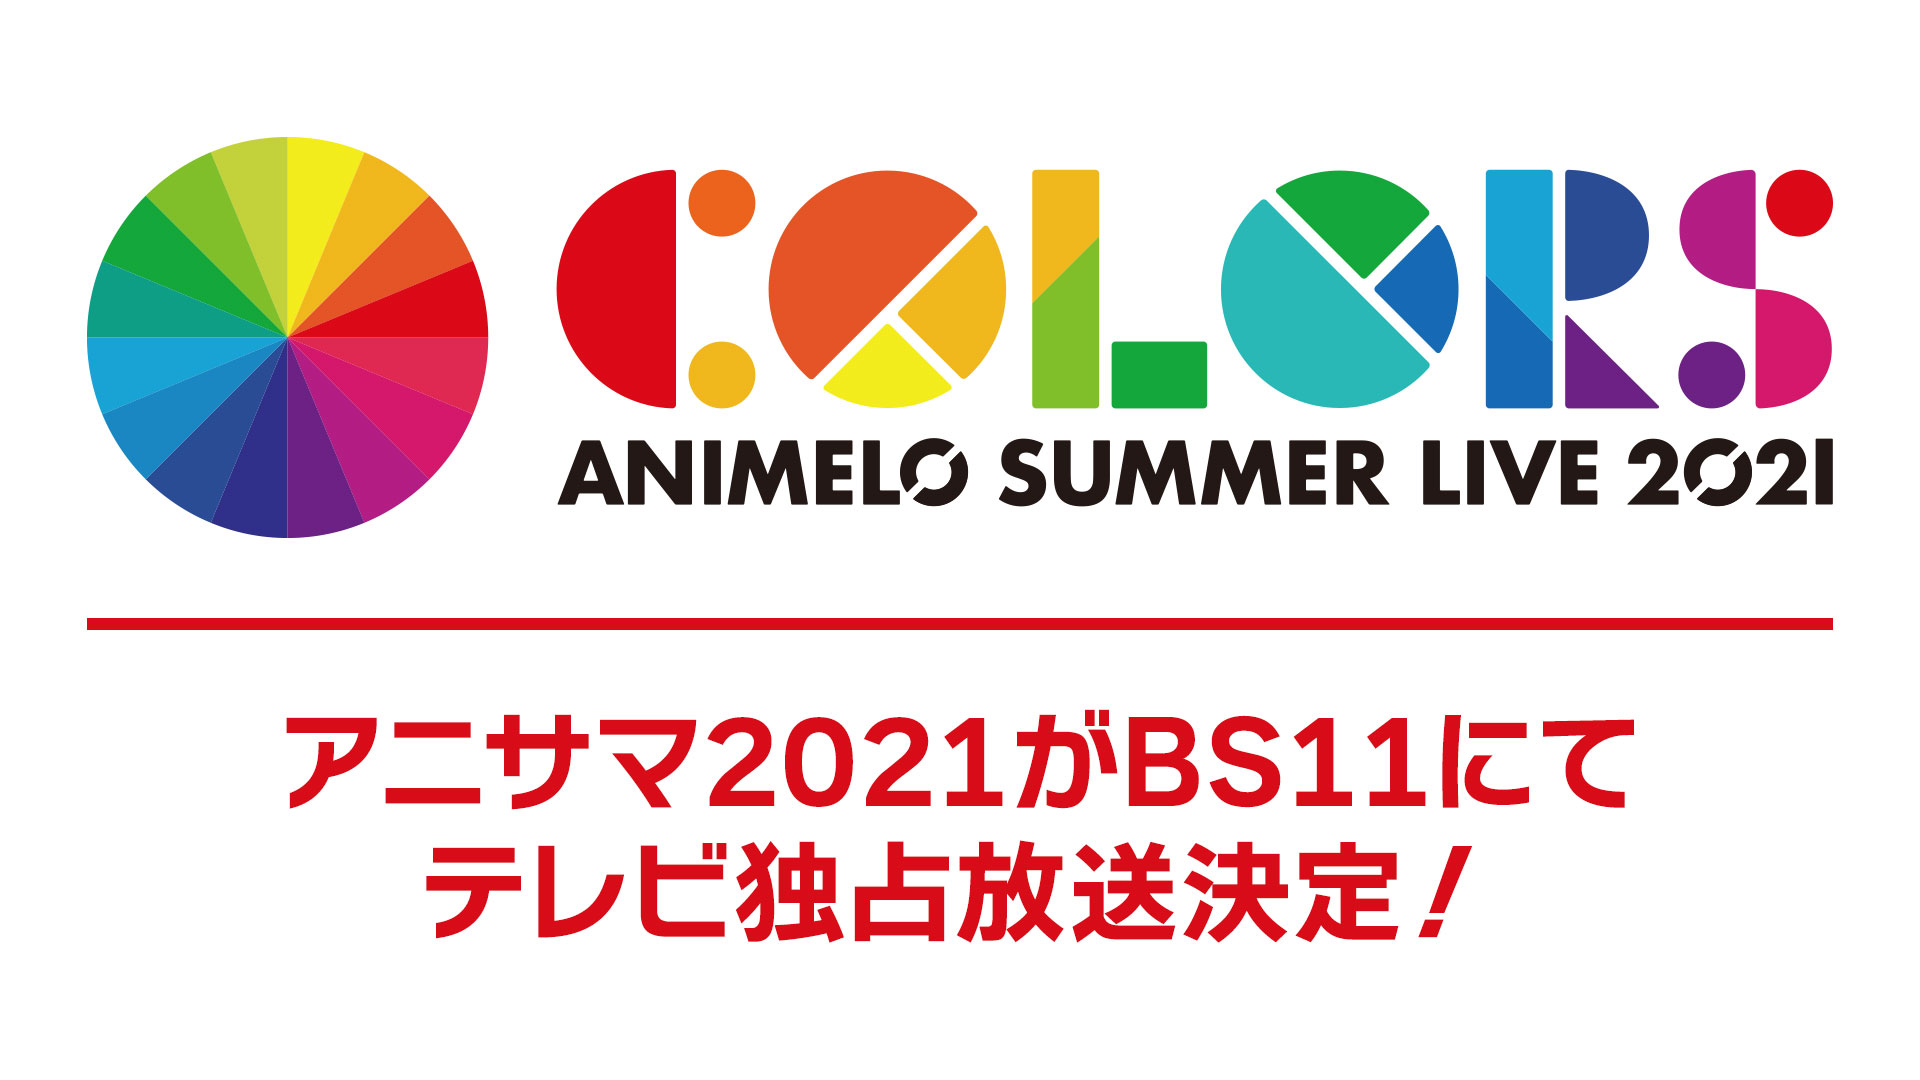 Animelo Summer Live 2021 -COLORS-